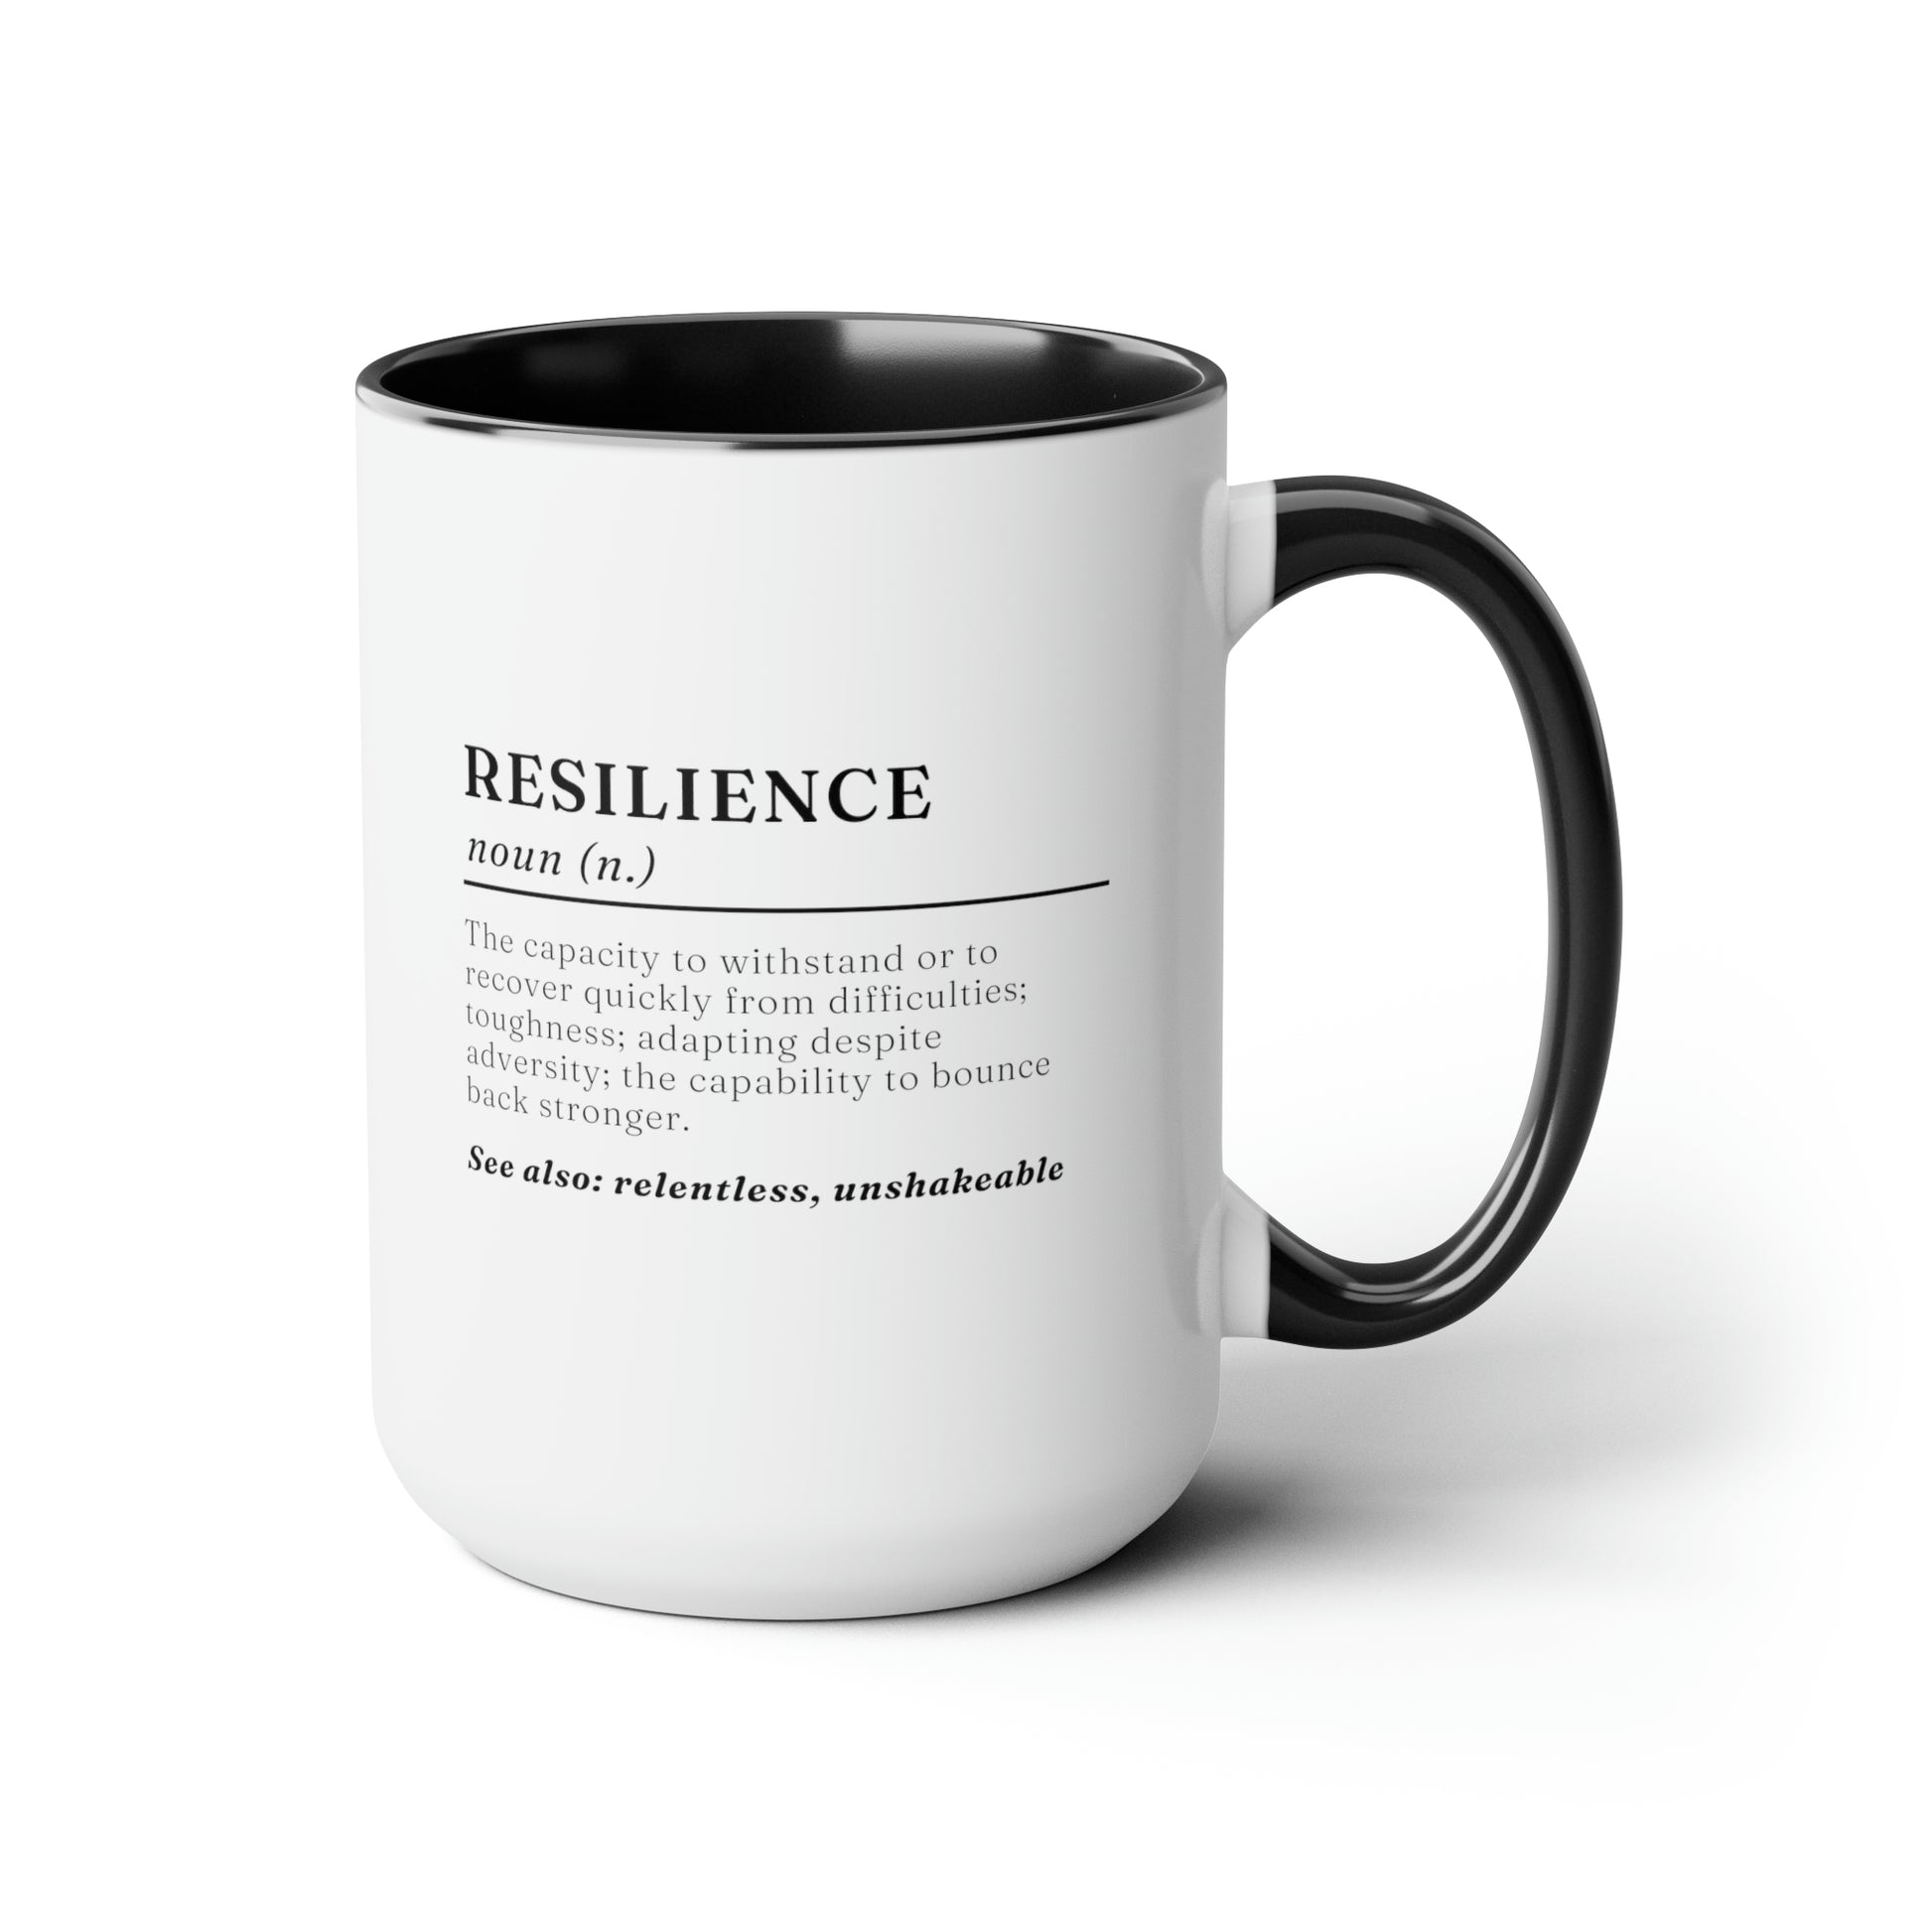 Resilience Definition 15oz white with black accent funny large coffee mug gift for friend support perseverance meaning motivational inspirational tough waveywares wavey wares wavywares wavy wares